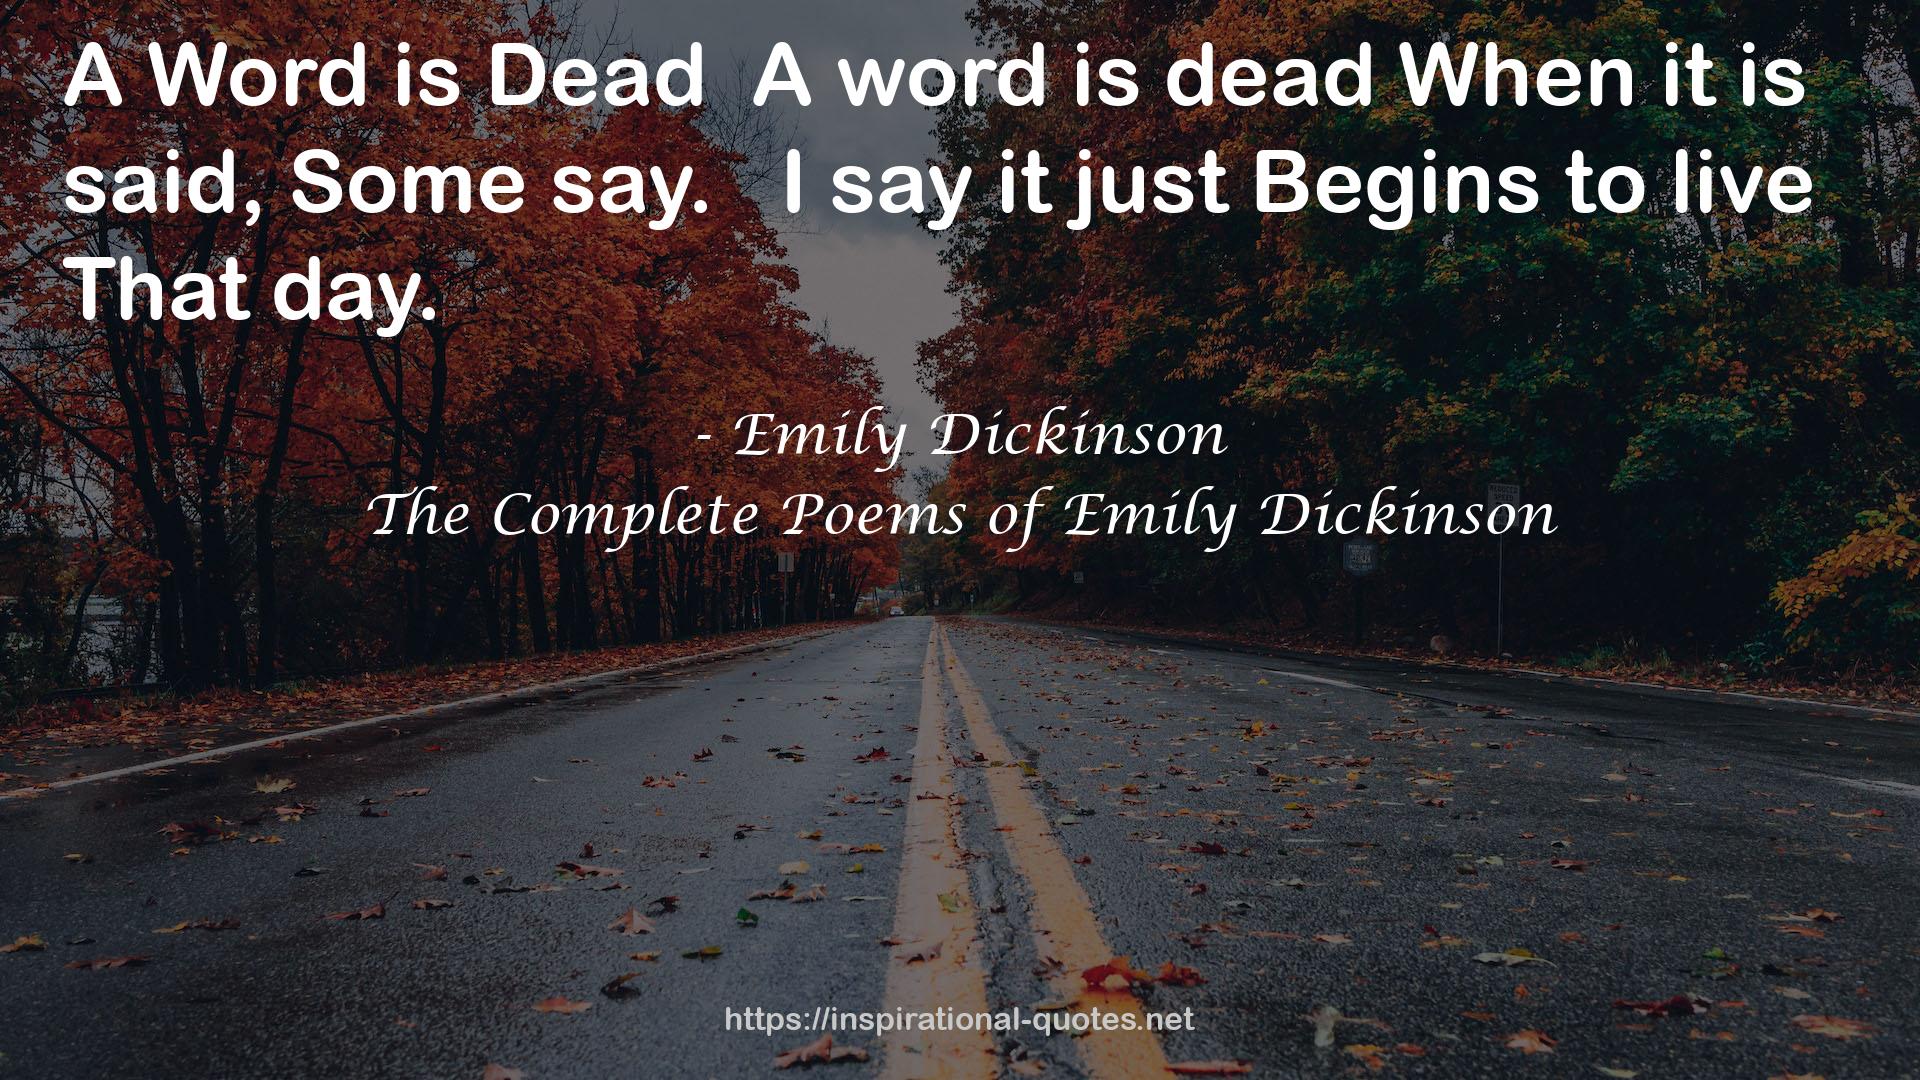 The Complete Poems of Emily Dickinson QUOTES